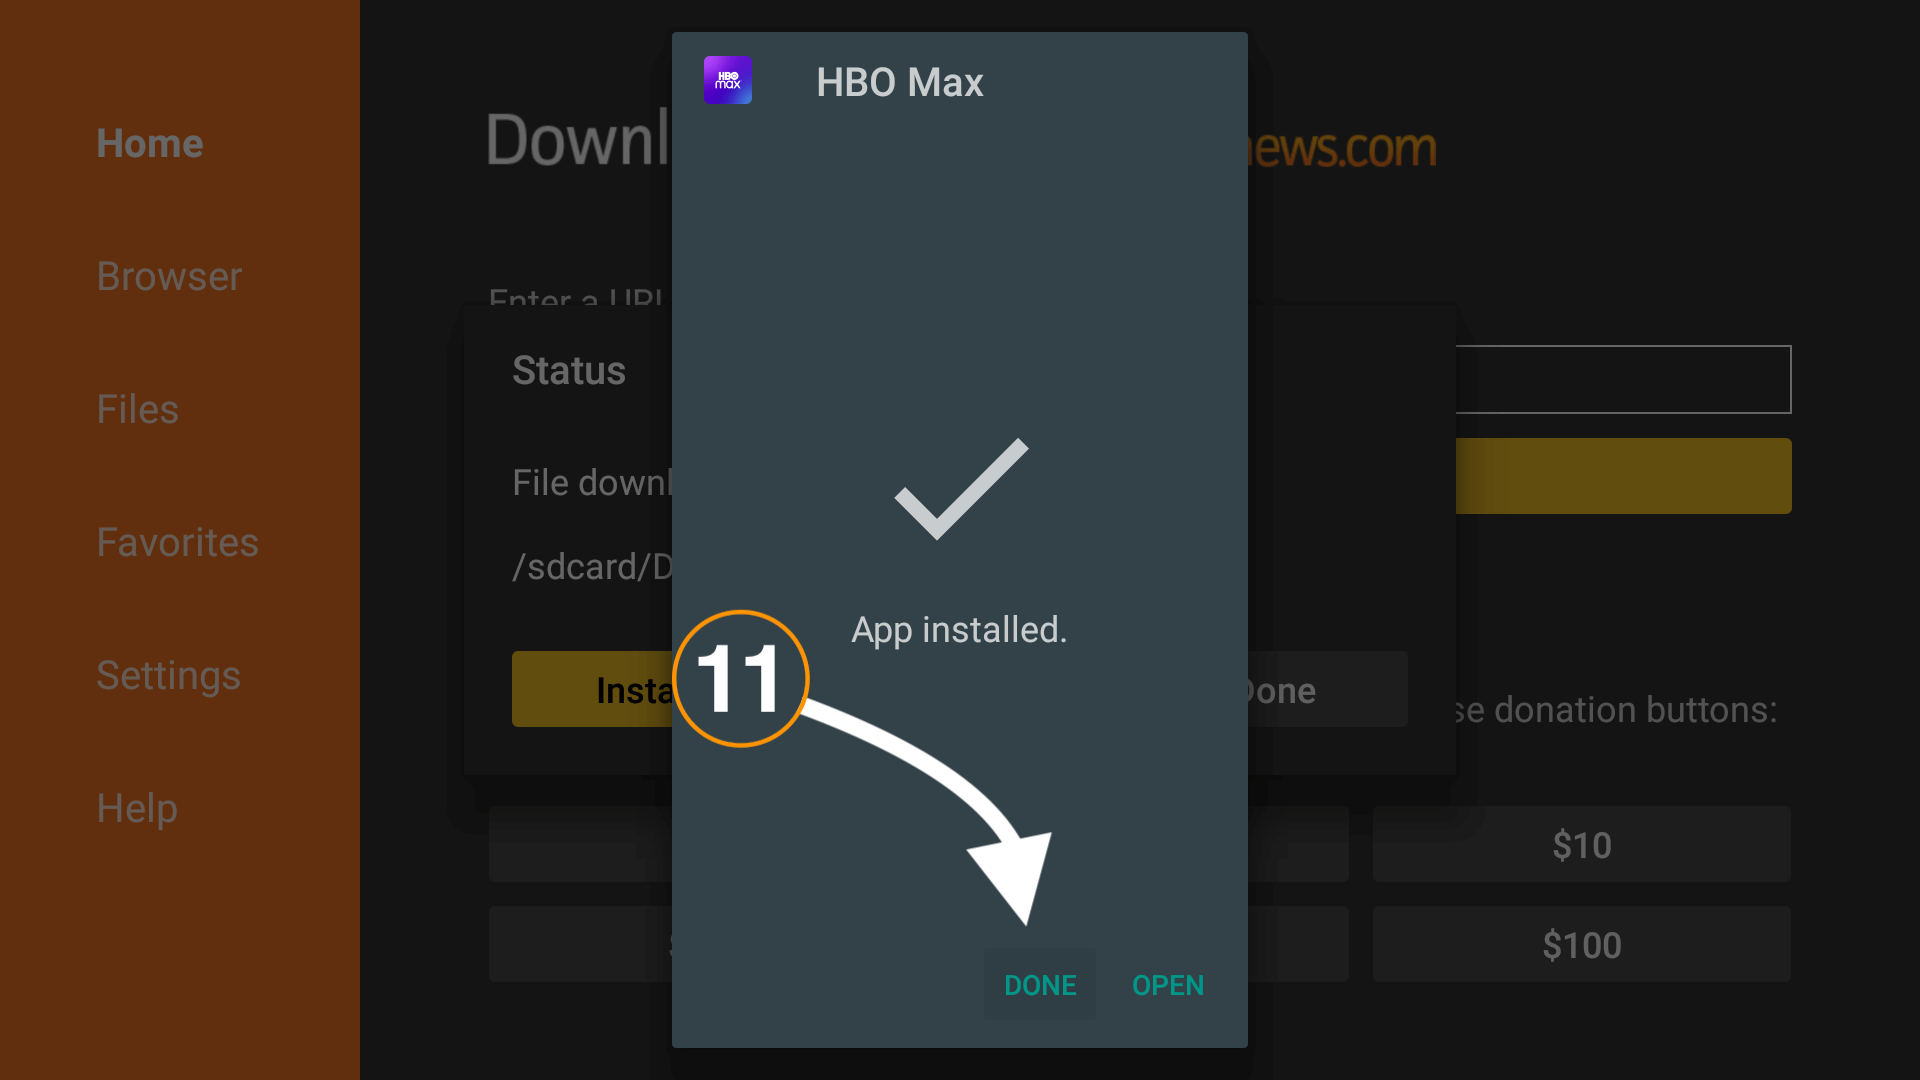 How-To-Use-HBO-Max-On-FireStick